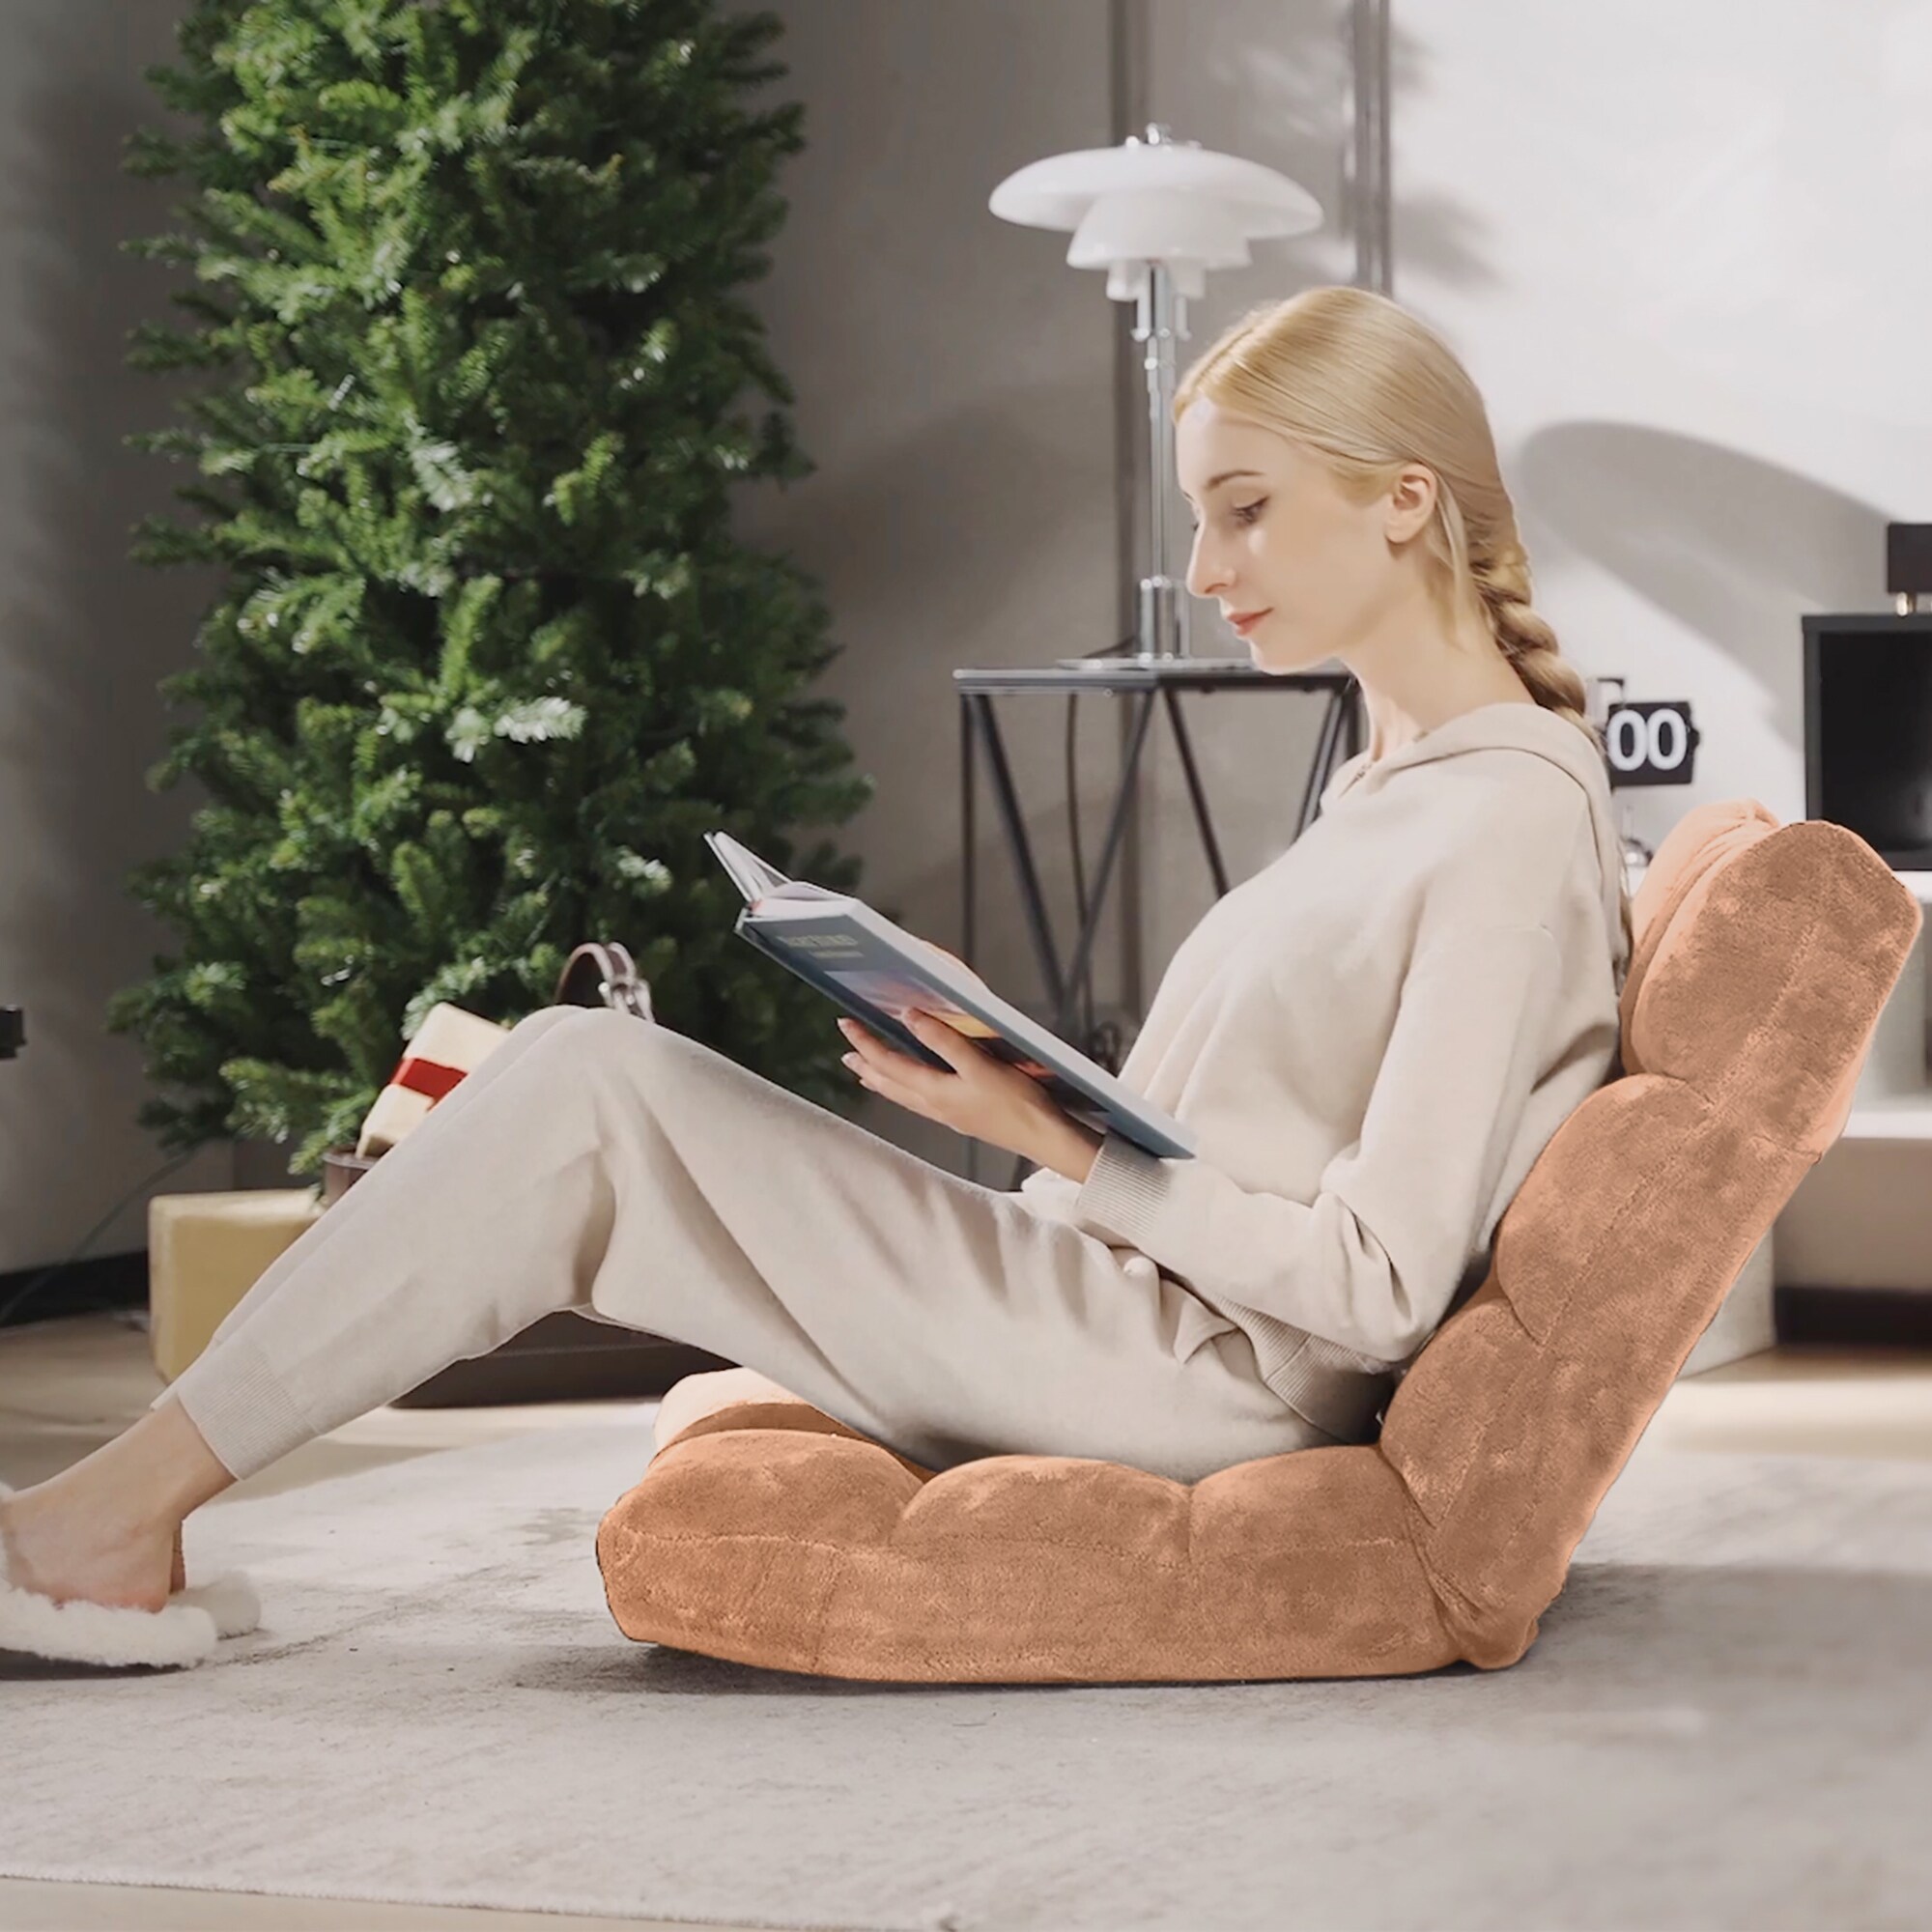  bonVIVO Floor Chair with Back Support - Multi-Angle